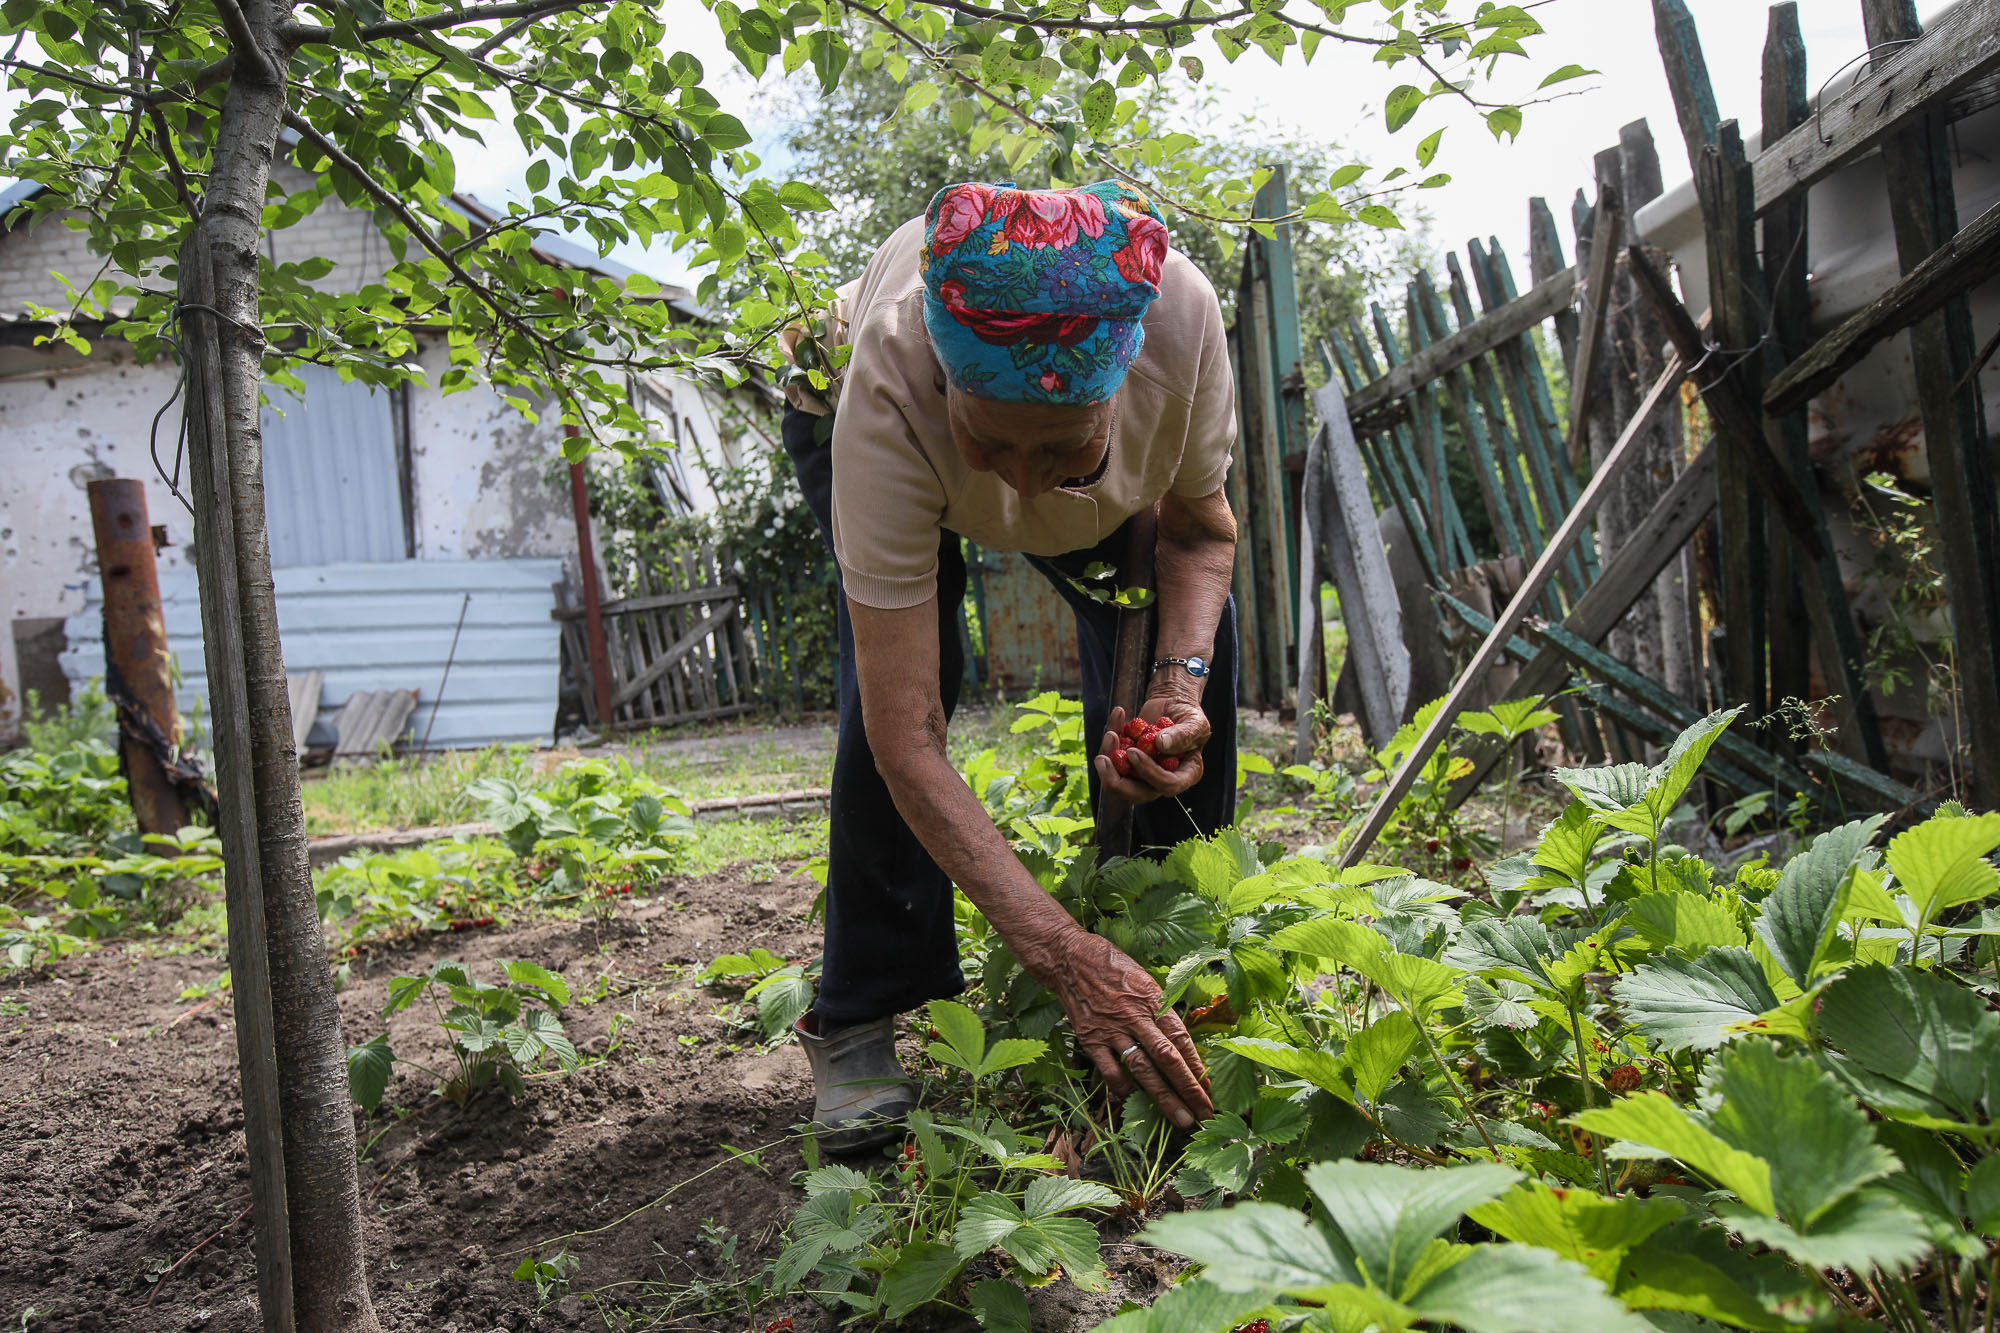 Mariya Horpynych, a elderly local civilian, takes the strawberries crop in a kitchen garden near her house in the town of Opytne on June 12, 2019.